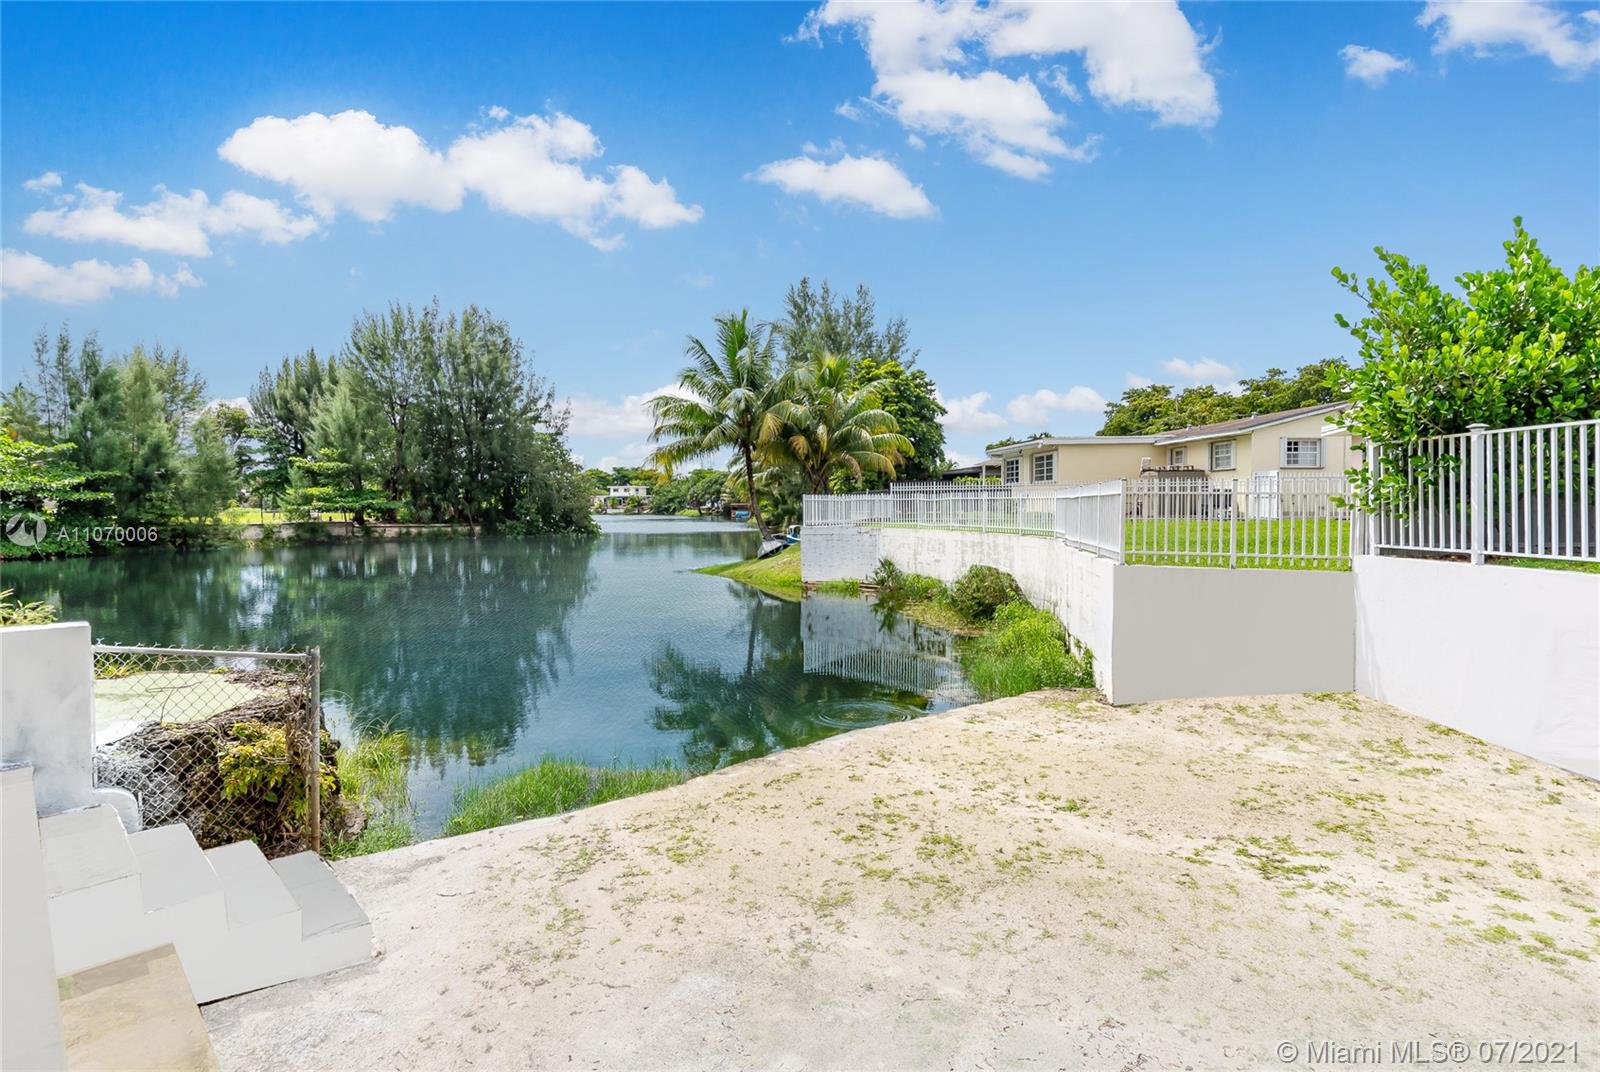 Photo 27 of 751 Heron Ave in Miami Springs - MLS A11070006